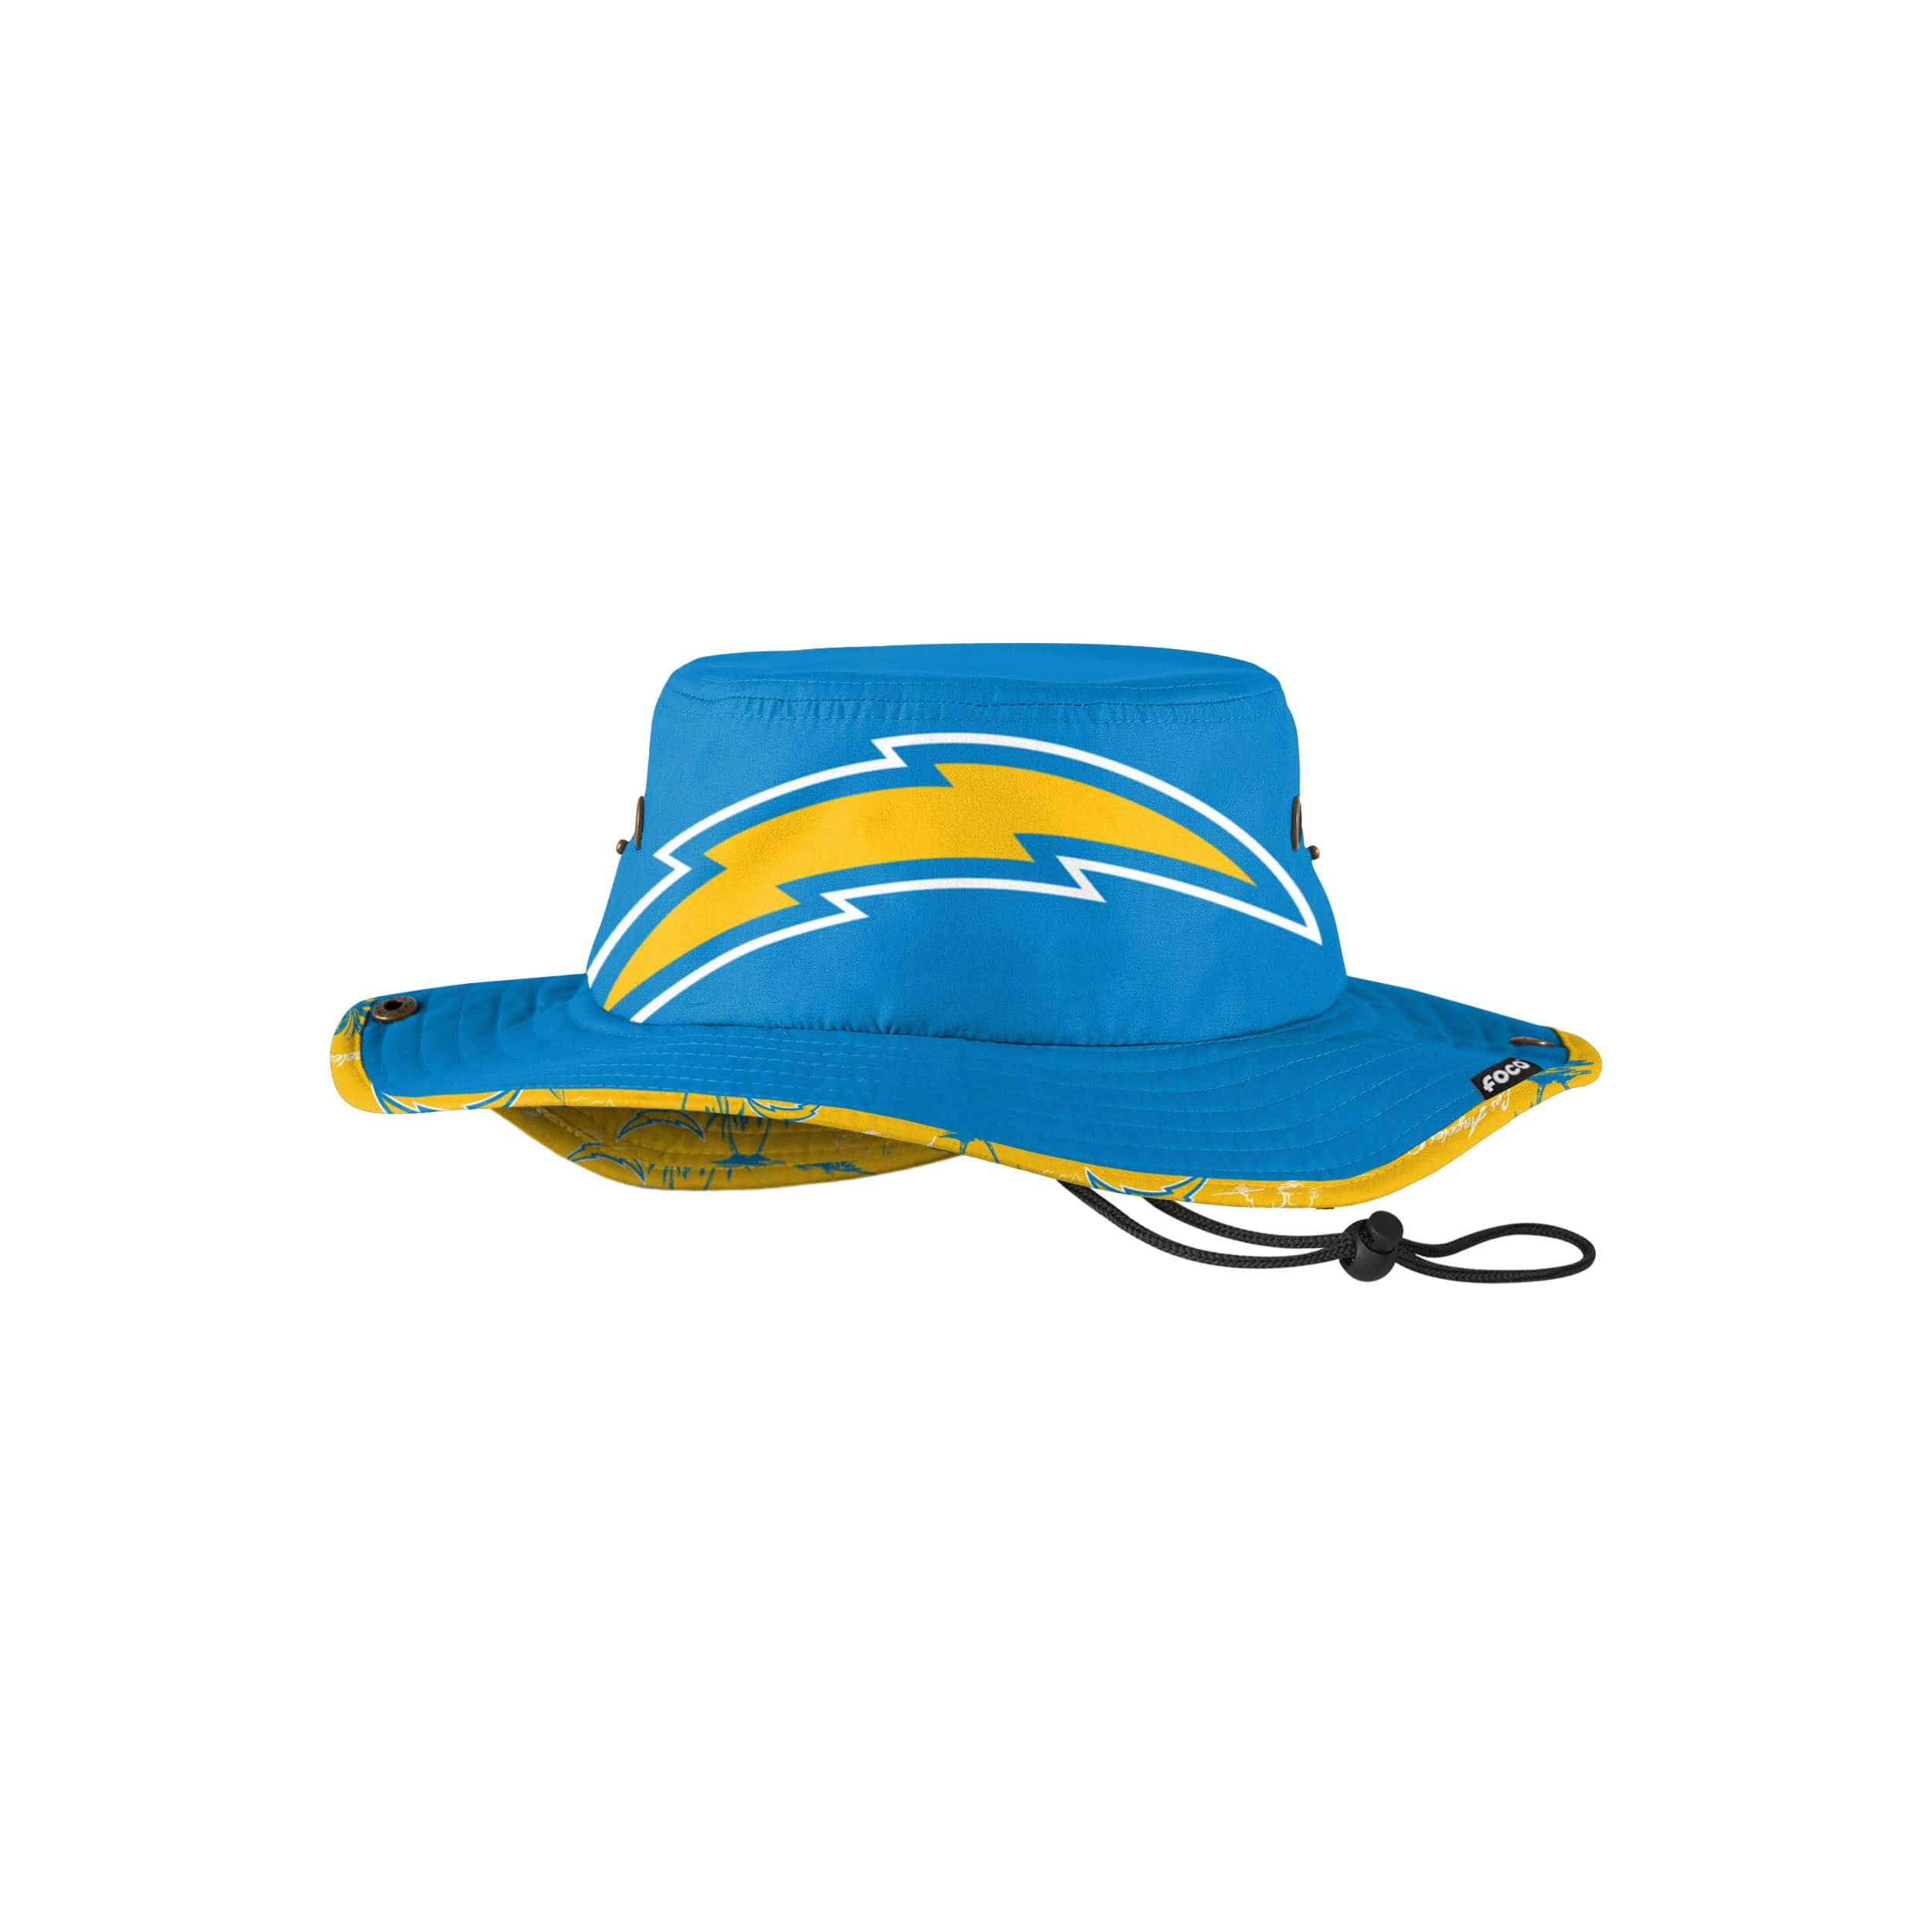 Los Angeles Chargers Ladies Hats, Chargers Caps, Bucket Hats, Visors